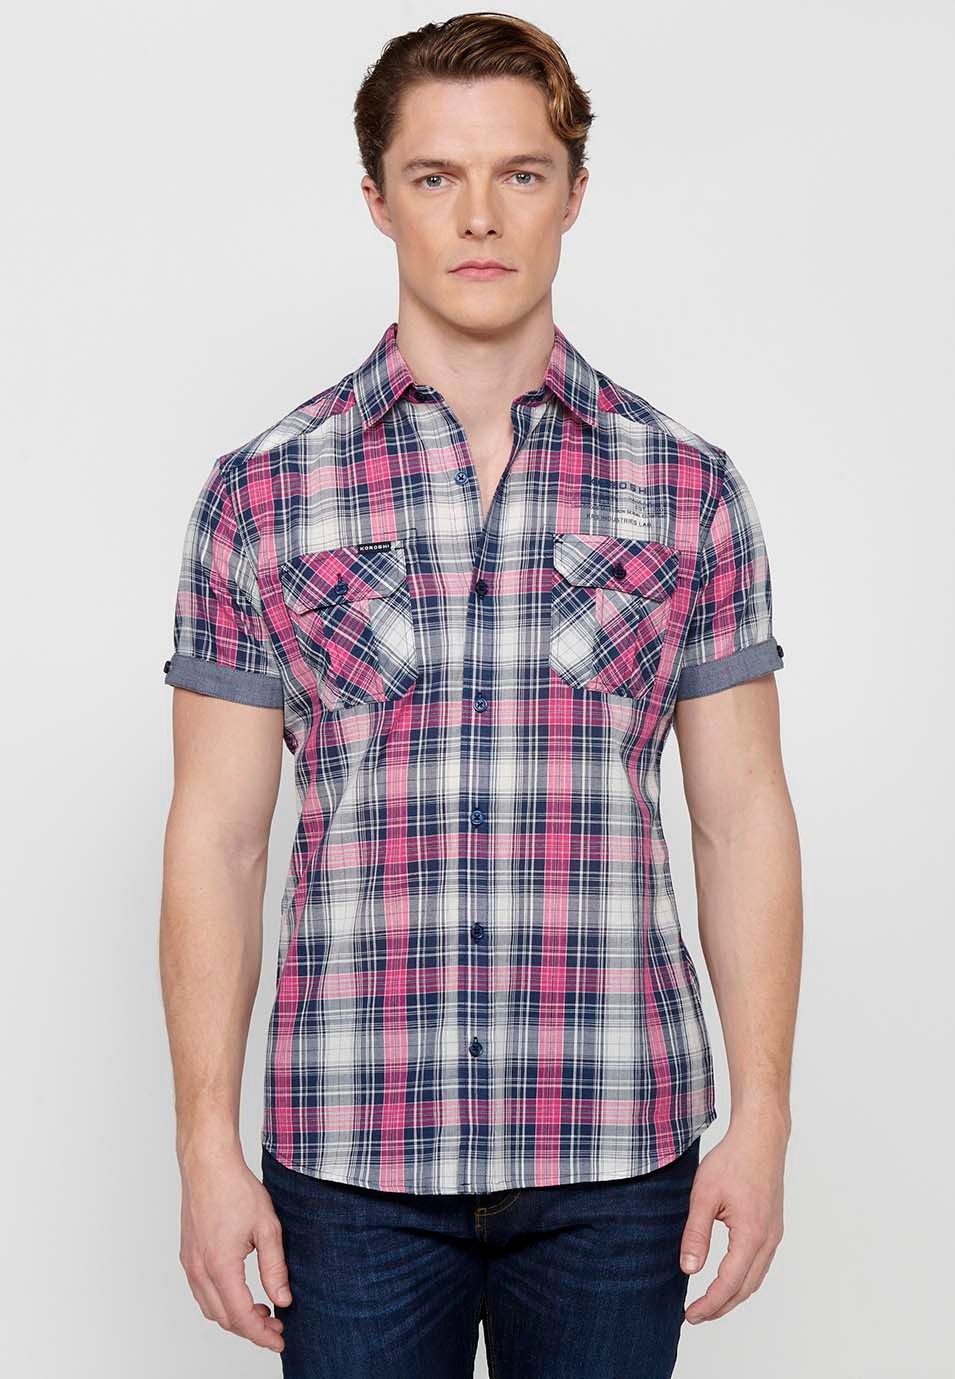 Short Sleeve Cotton Shirt with Turn-Up Finish and Button Front Closure with Front Flap Pockets and Pink Plaid Print for Men 3